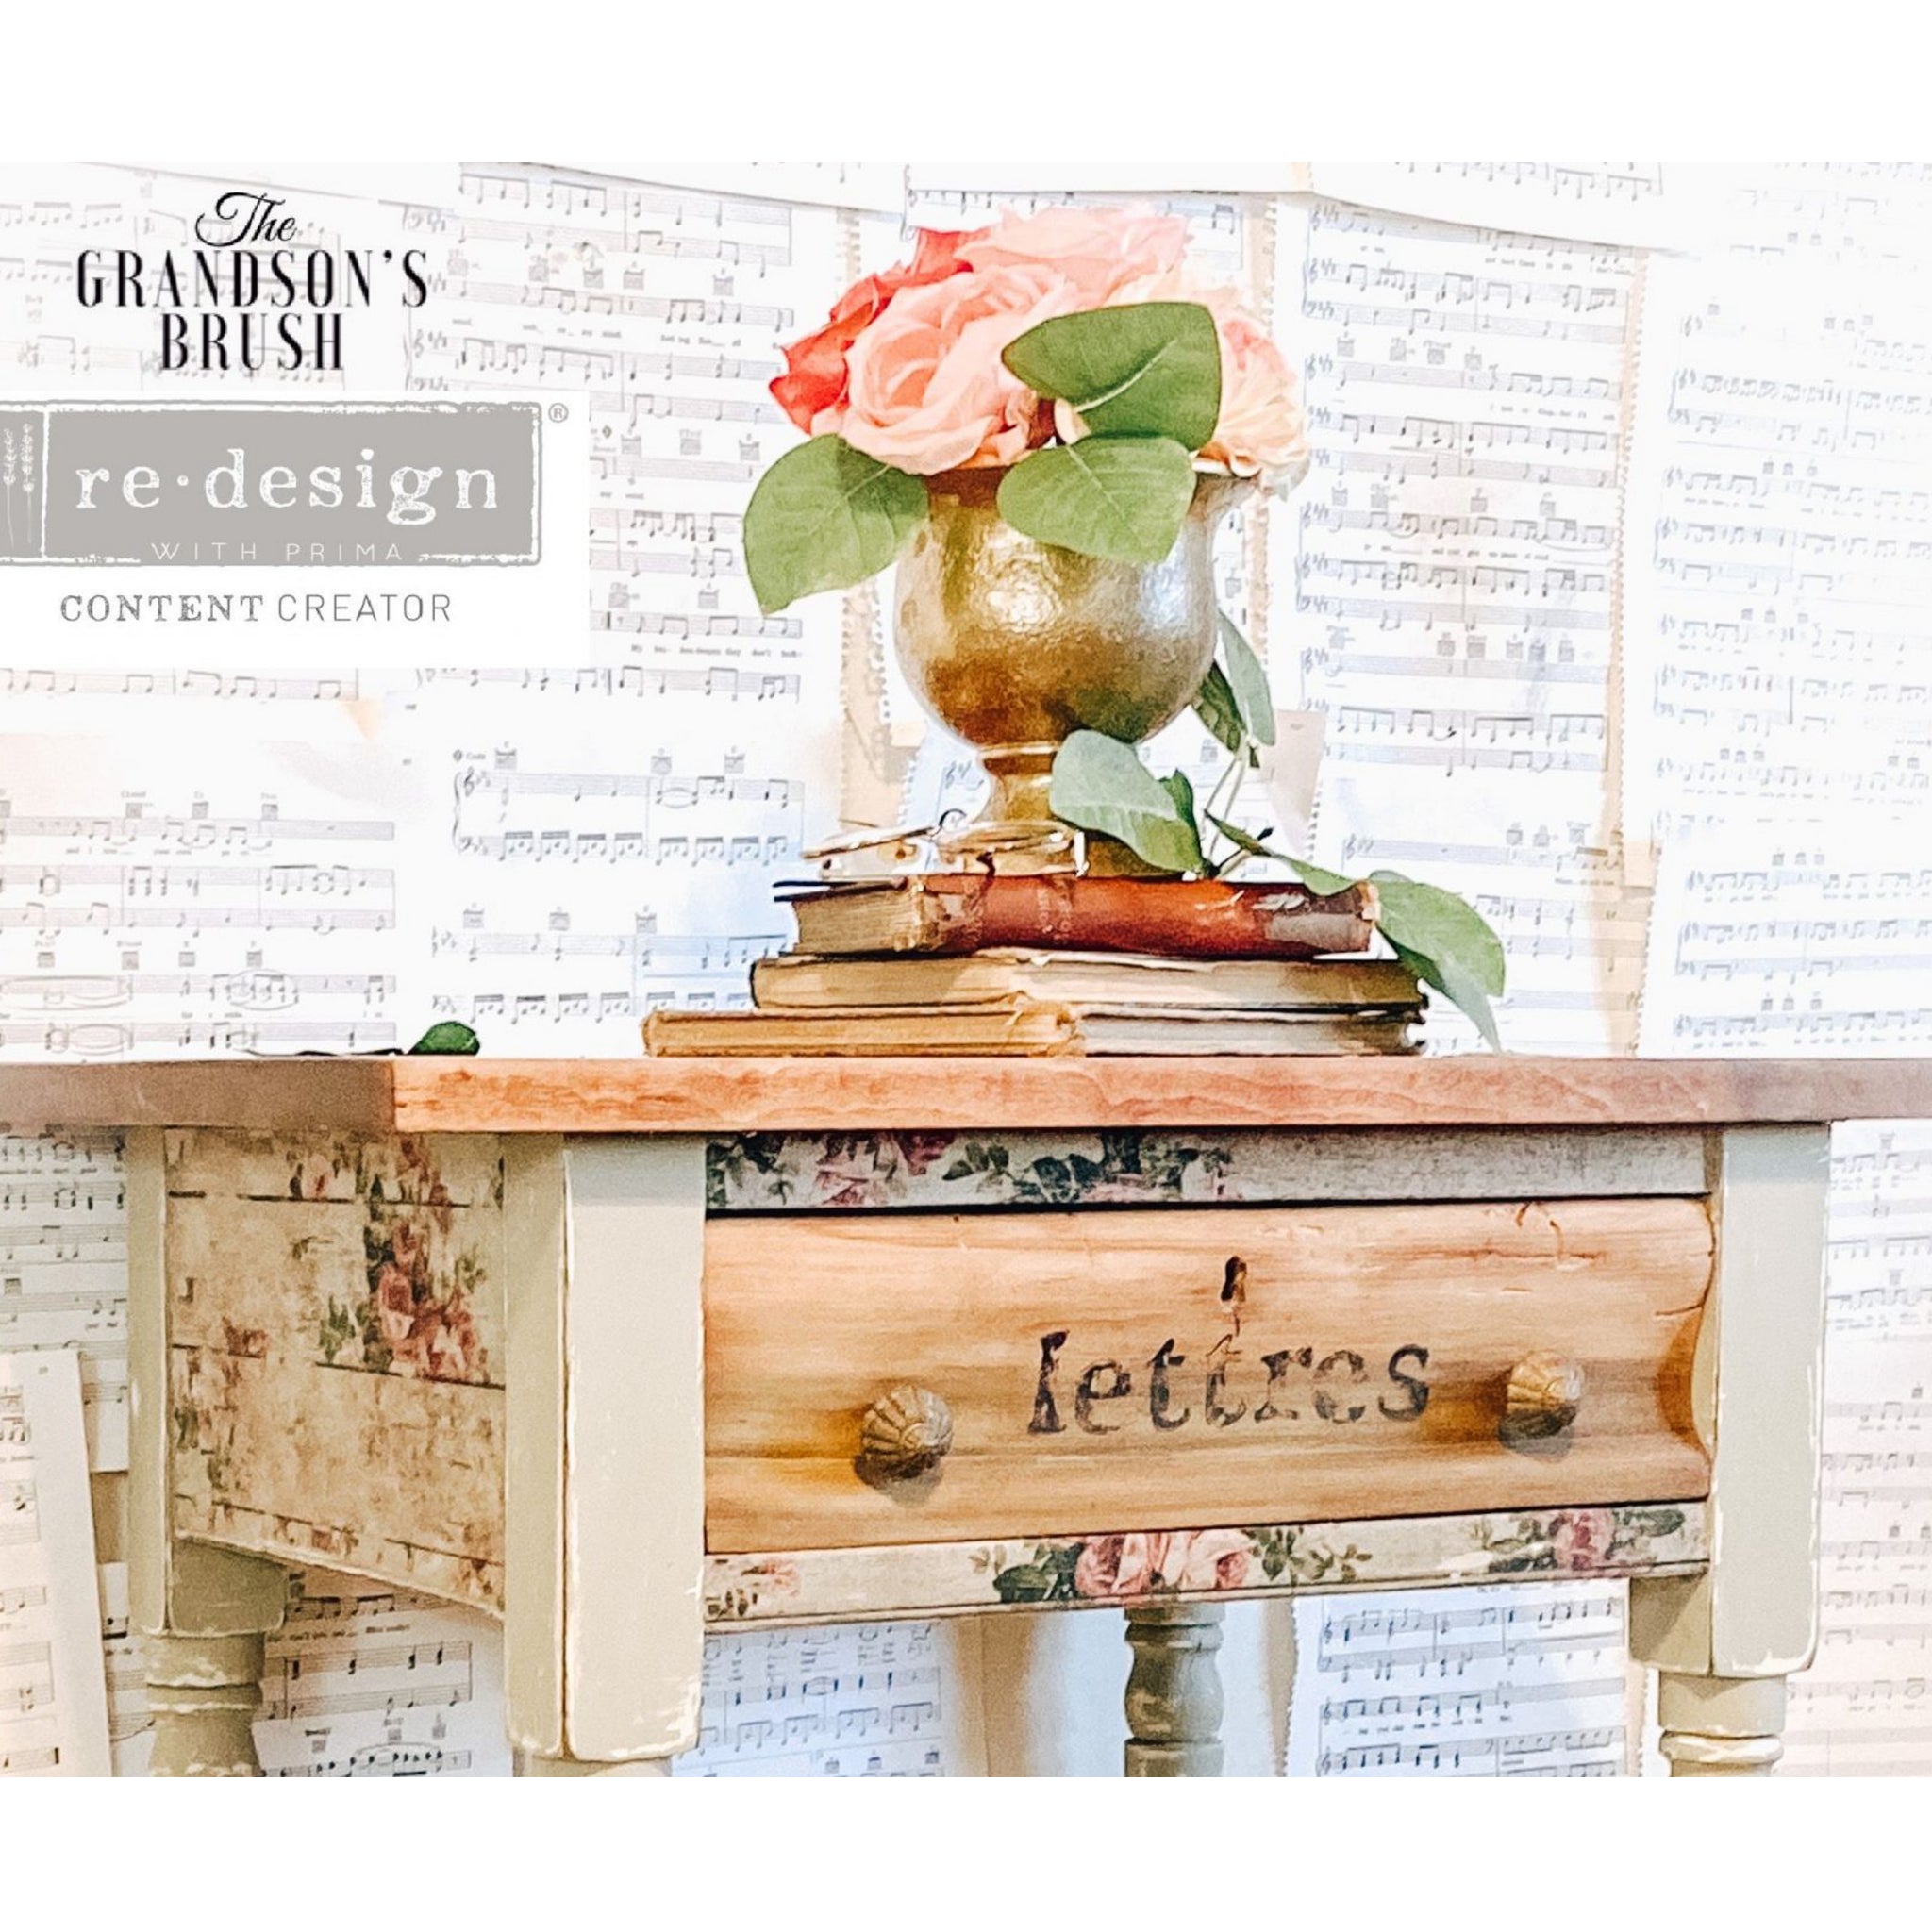 A vintage nightstand with 1 drawer refurbished by The Grandson's Brush is painted antique white with a natural wood top and features ReDesign with Prima's Shabby Floral tissue paper on the sides and above and below the drawer.